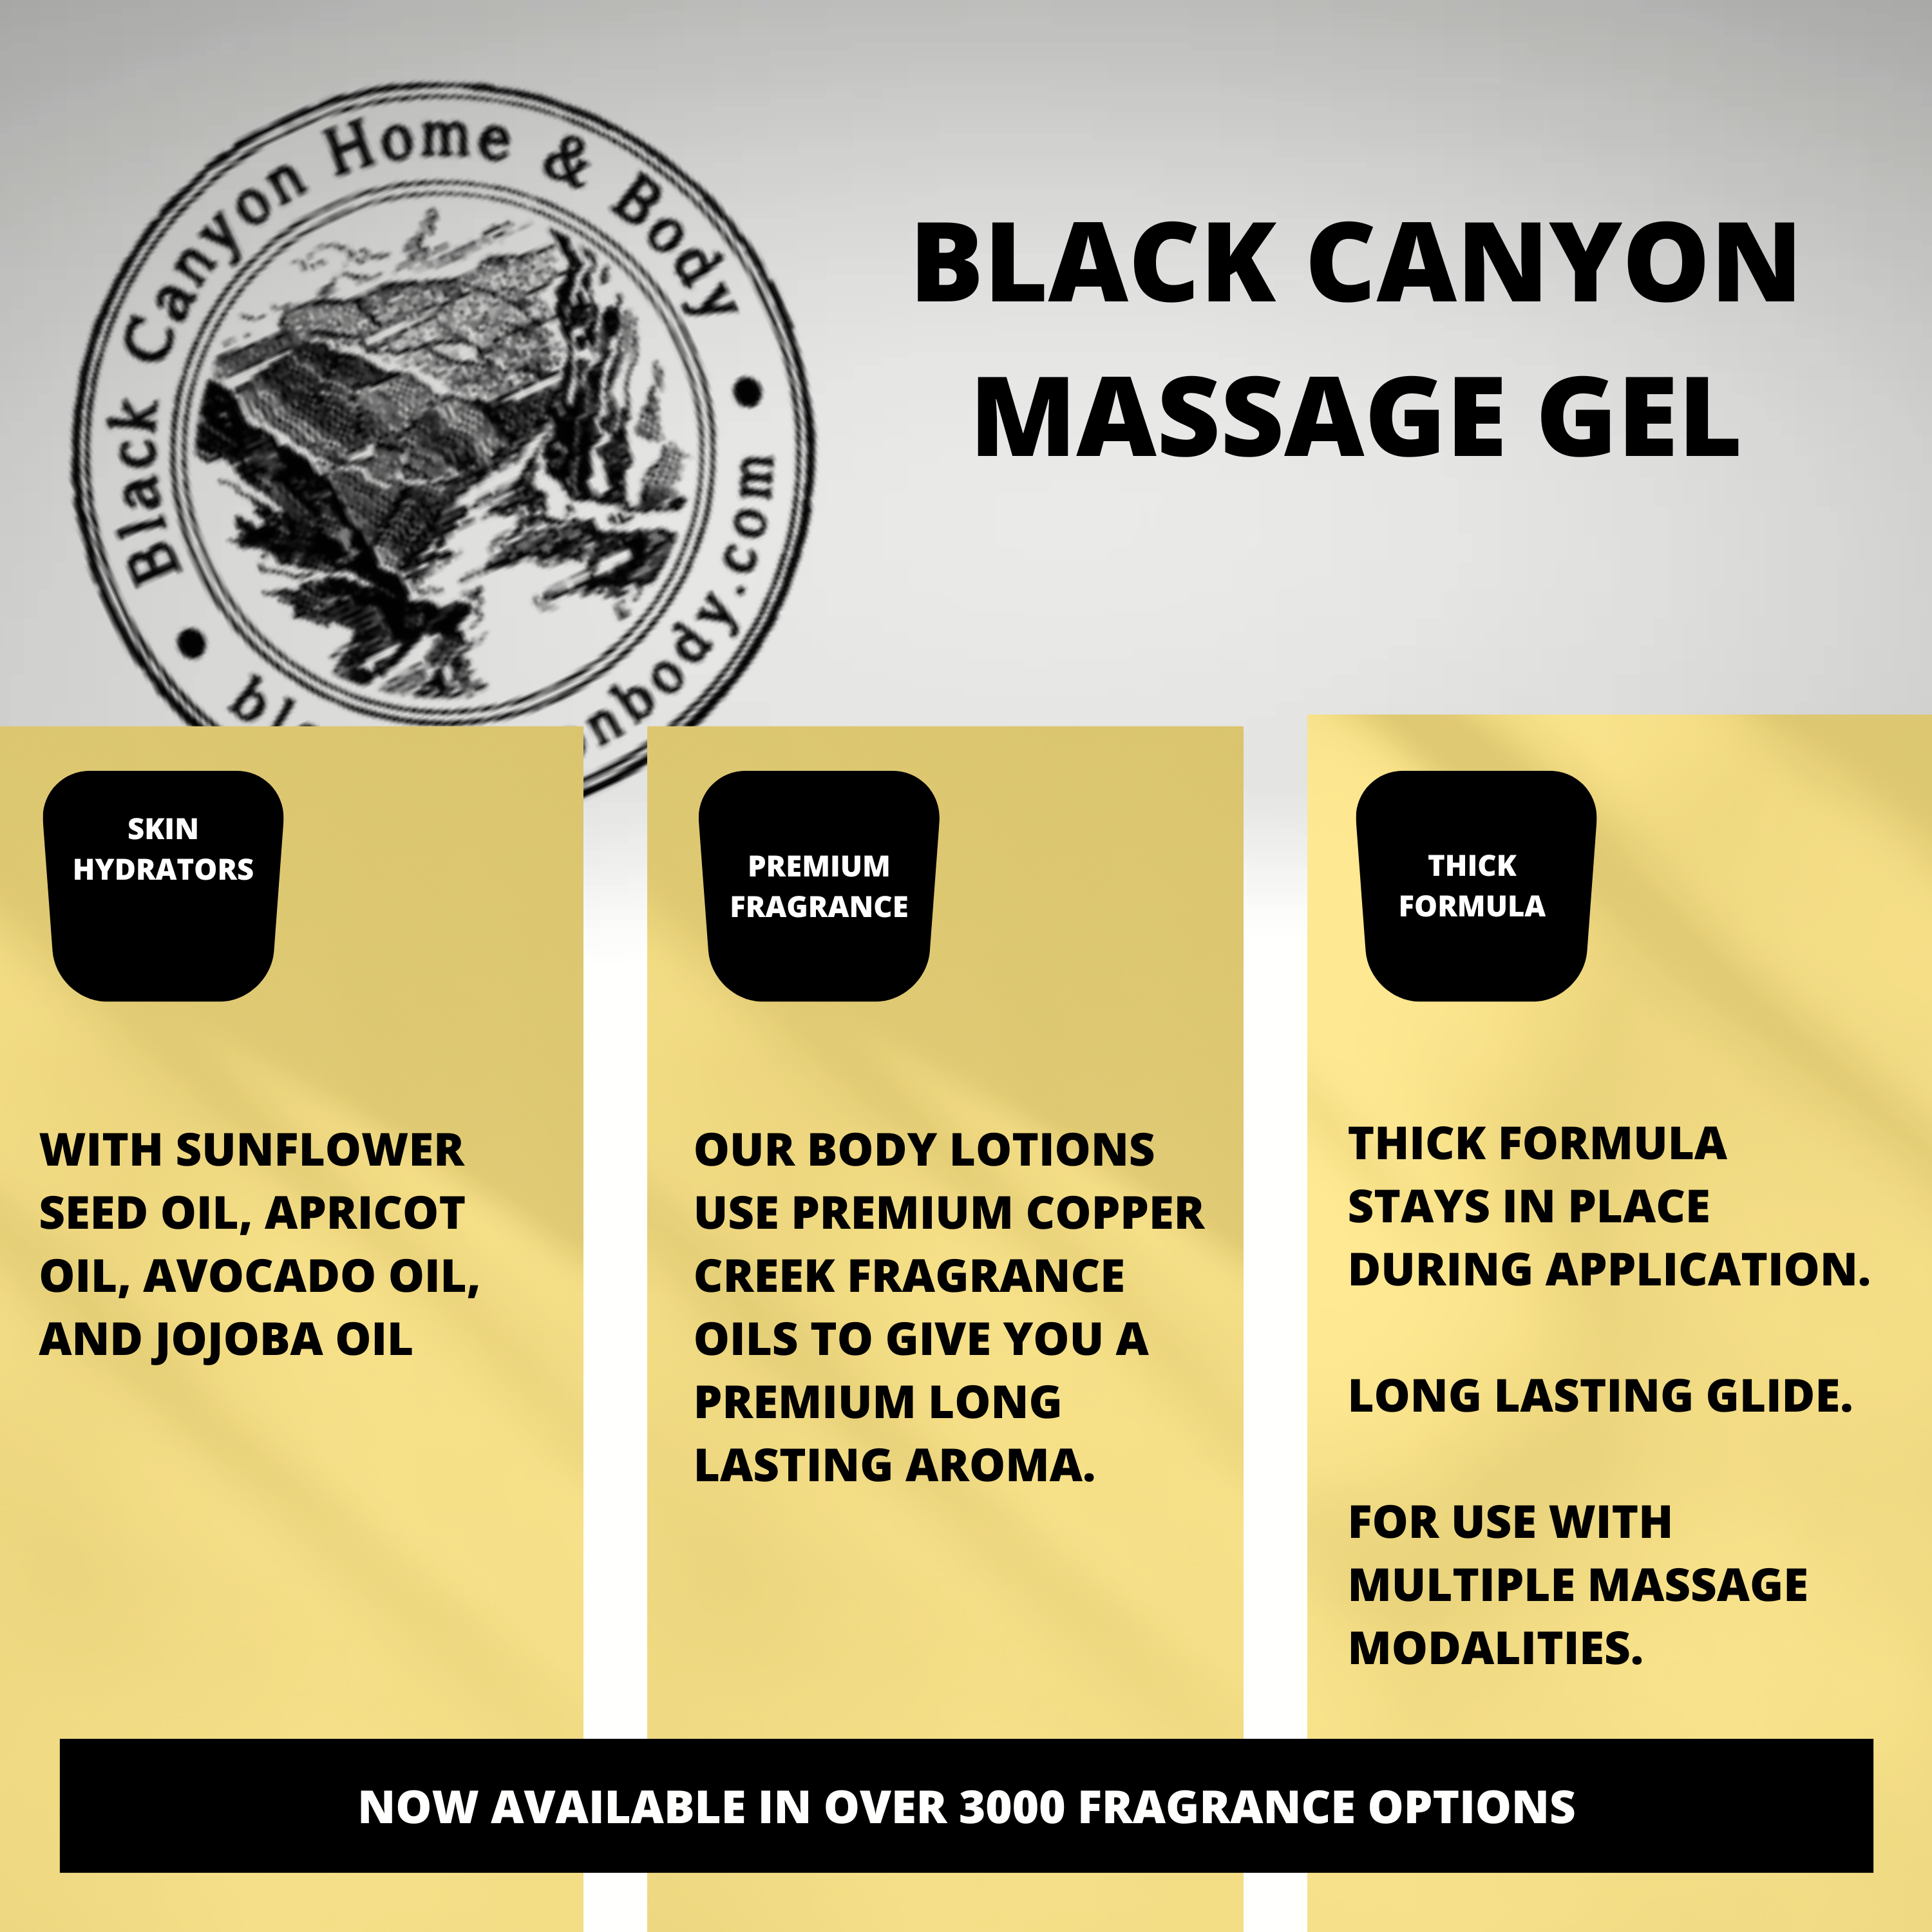 Black Canyon Winter Frost Scented Massage Gel